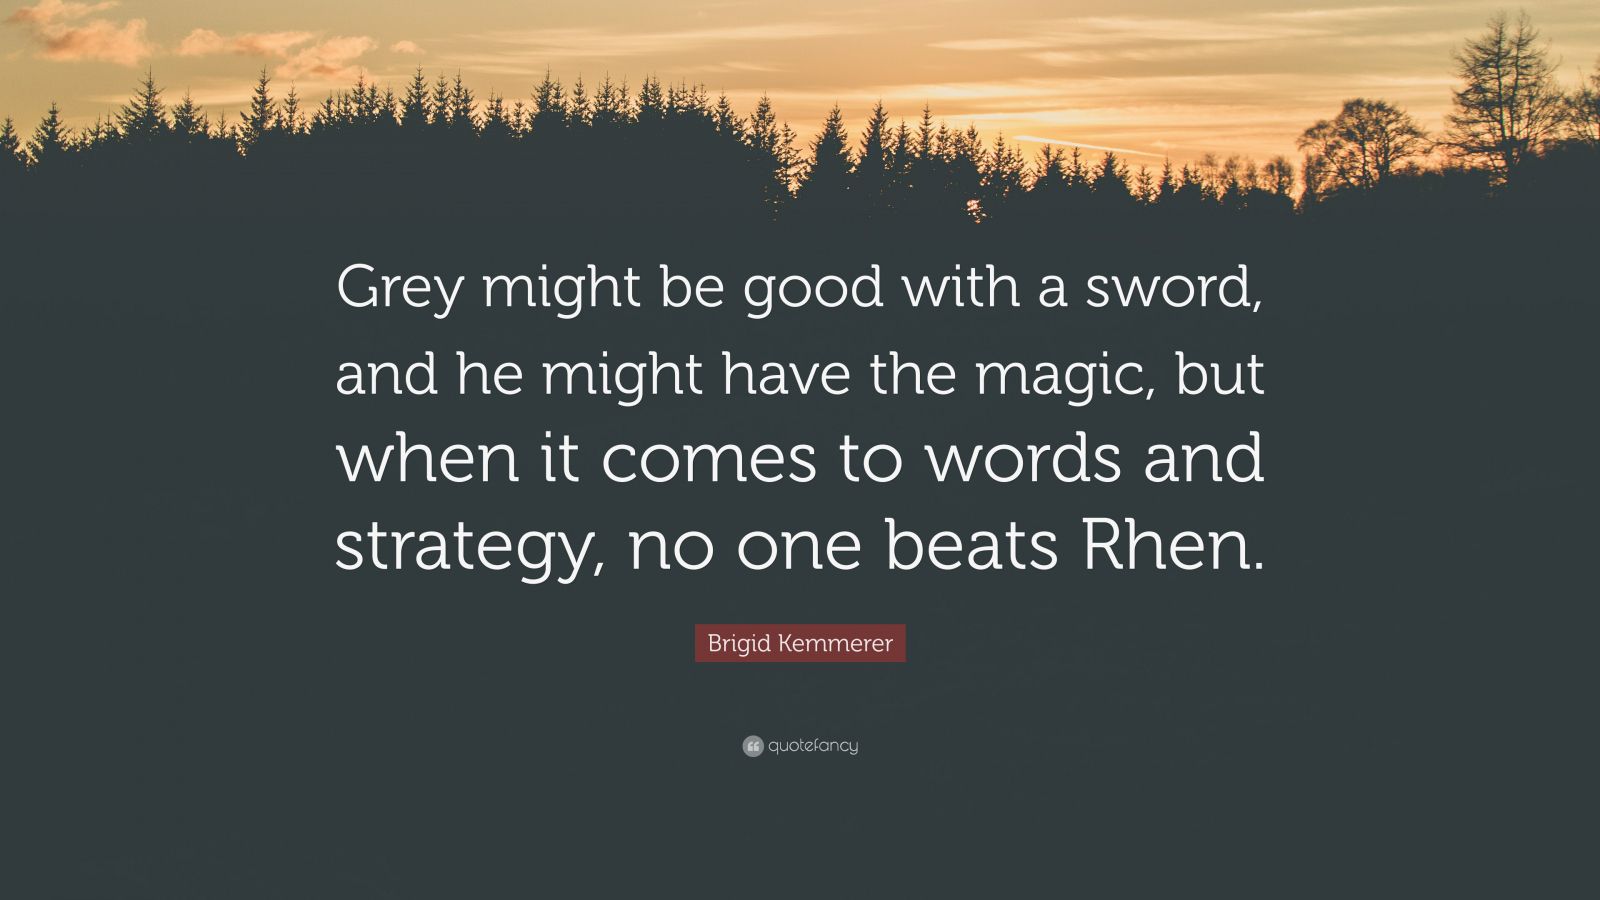 Brigid Kemmerer Quote: “Grey might be good with a sword, and he might ...